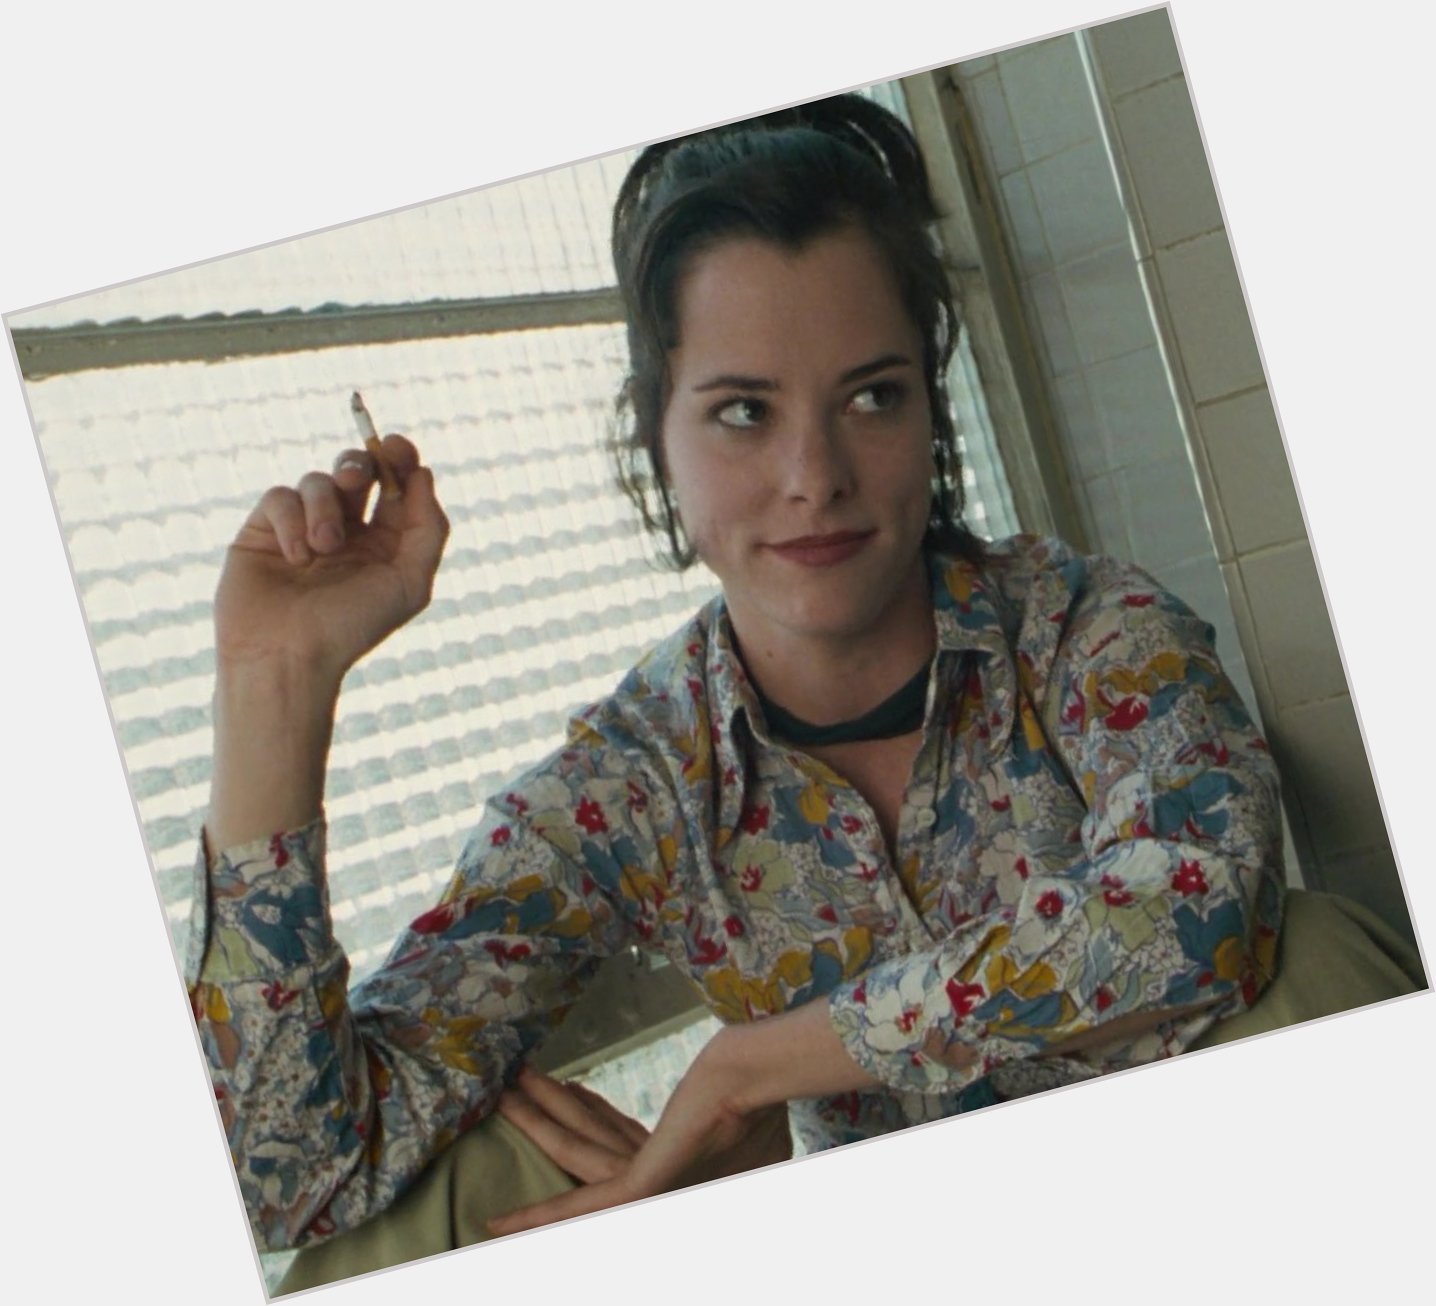 HAPPY BIRTHDAY TO PARKER POSEY!!!!!! <3 I LOVE HER SO MUCH 